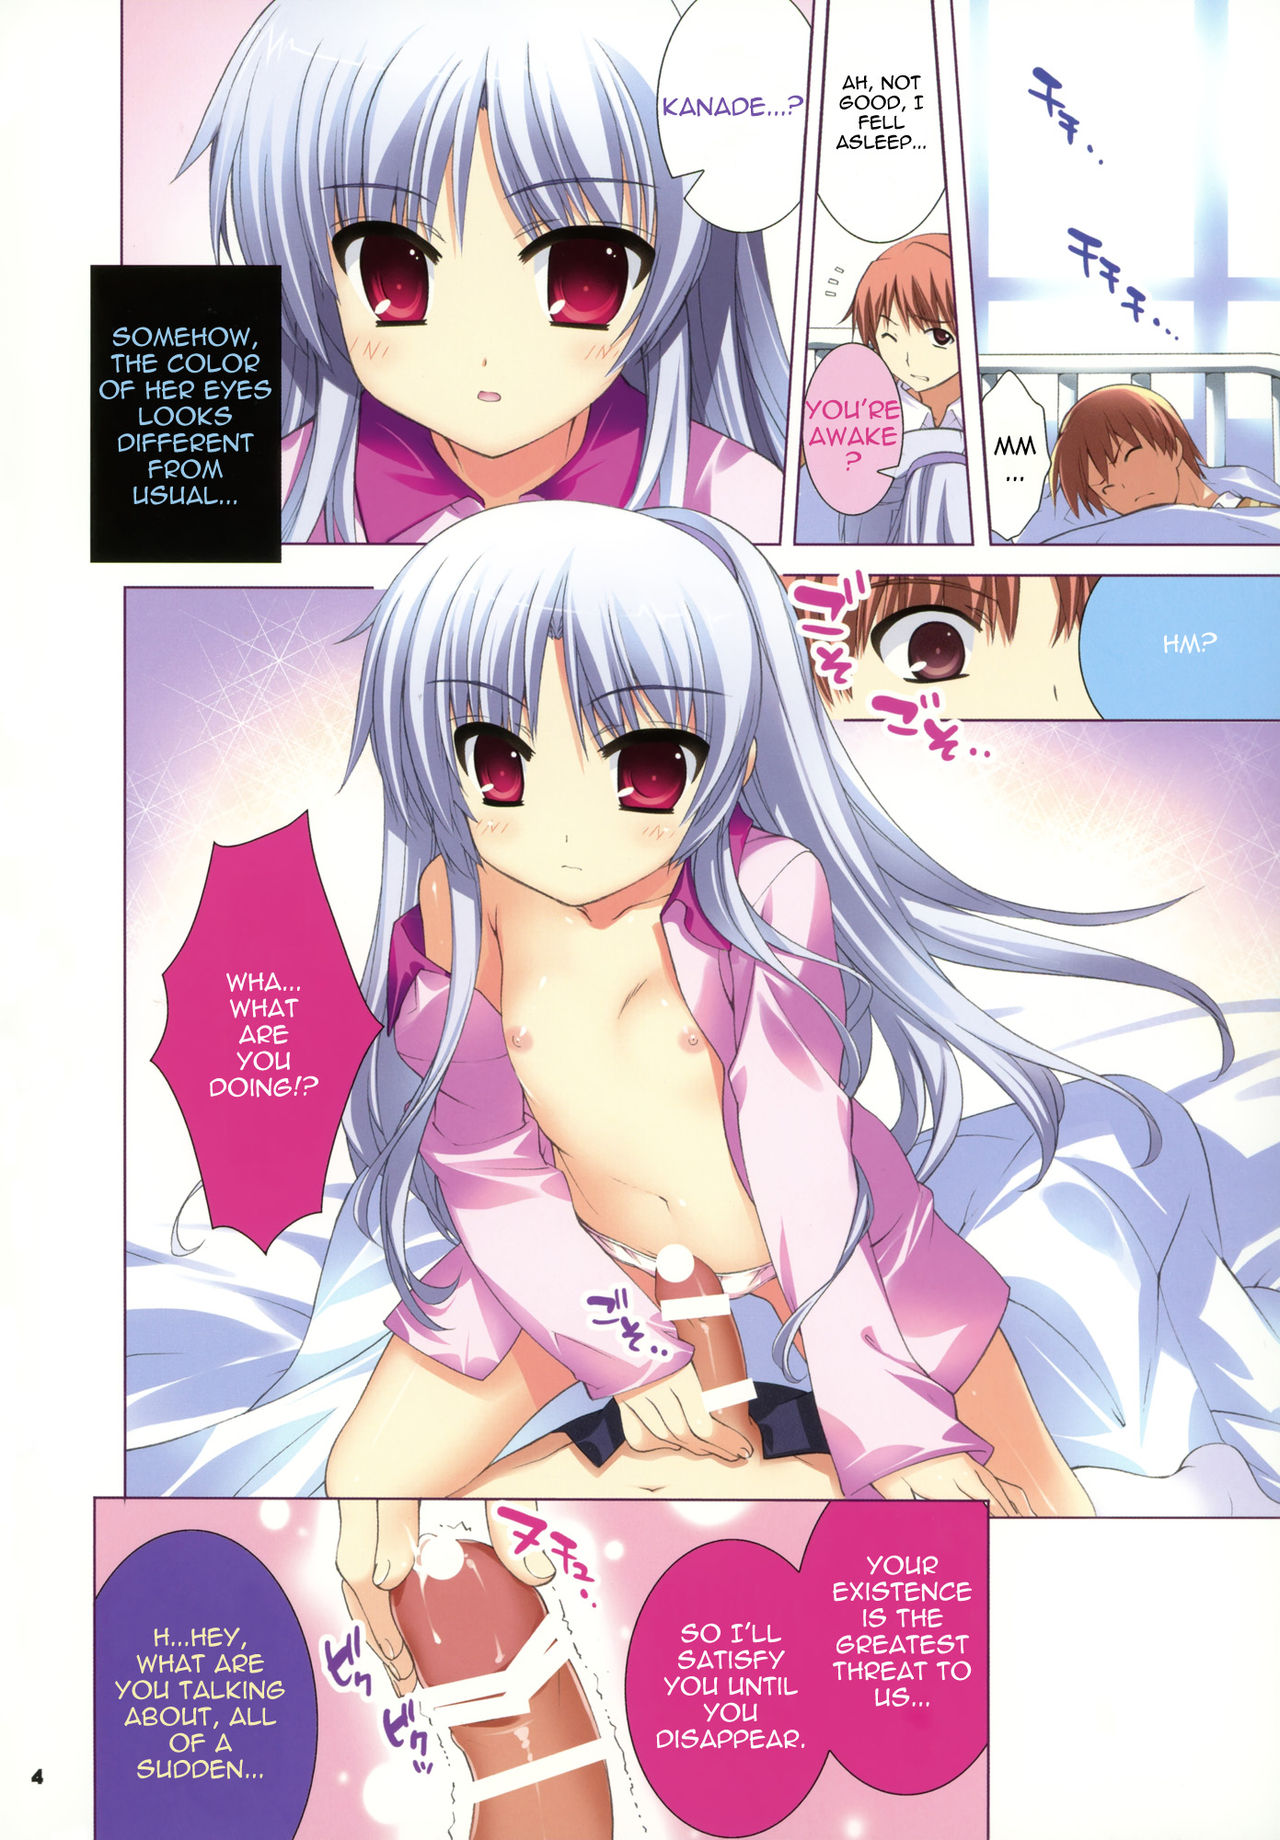 Small breasts galore! Anime and manga sex and nudity edition